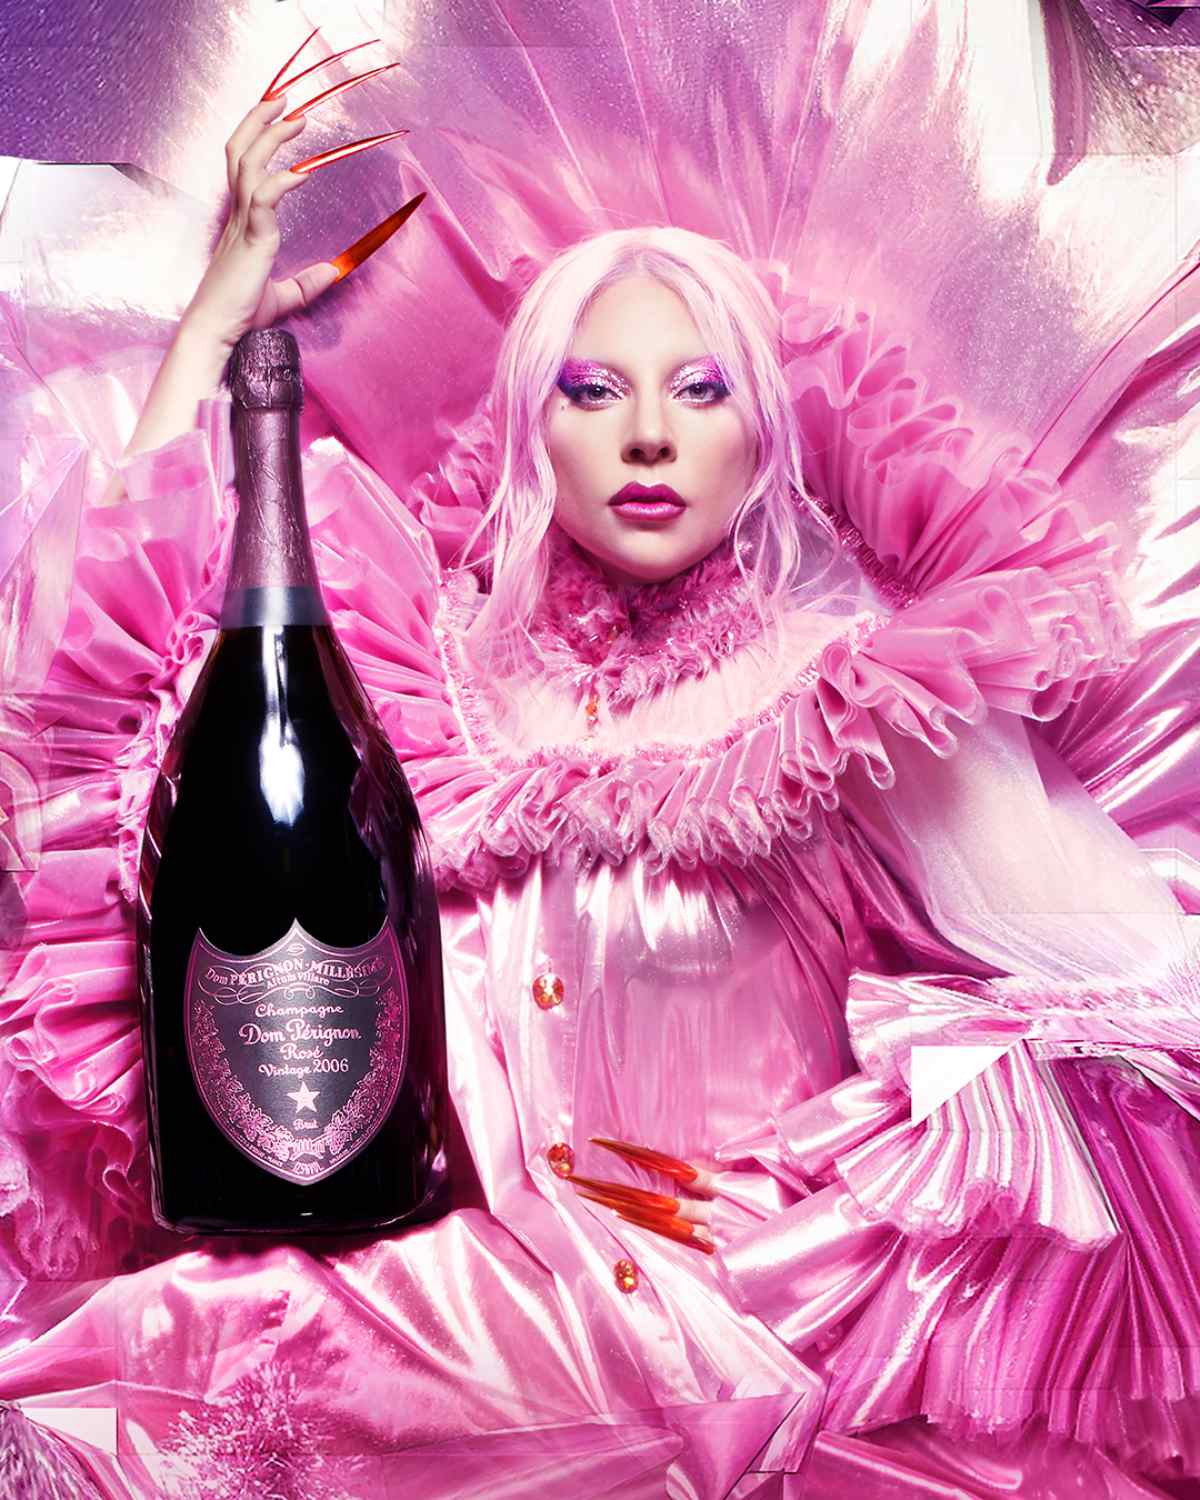 Dom Pérignon X Lady Gaga - This Is The Story Of Two Creative Forces